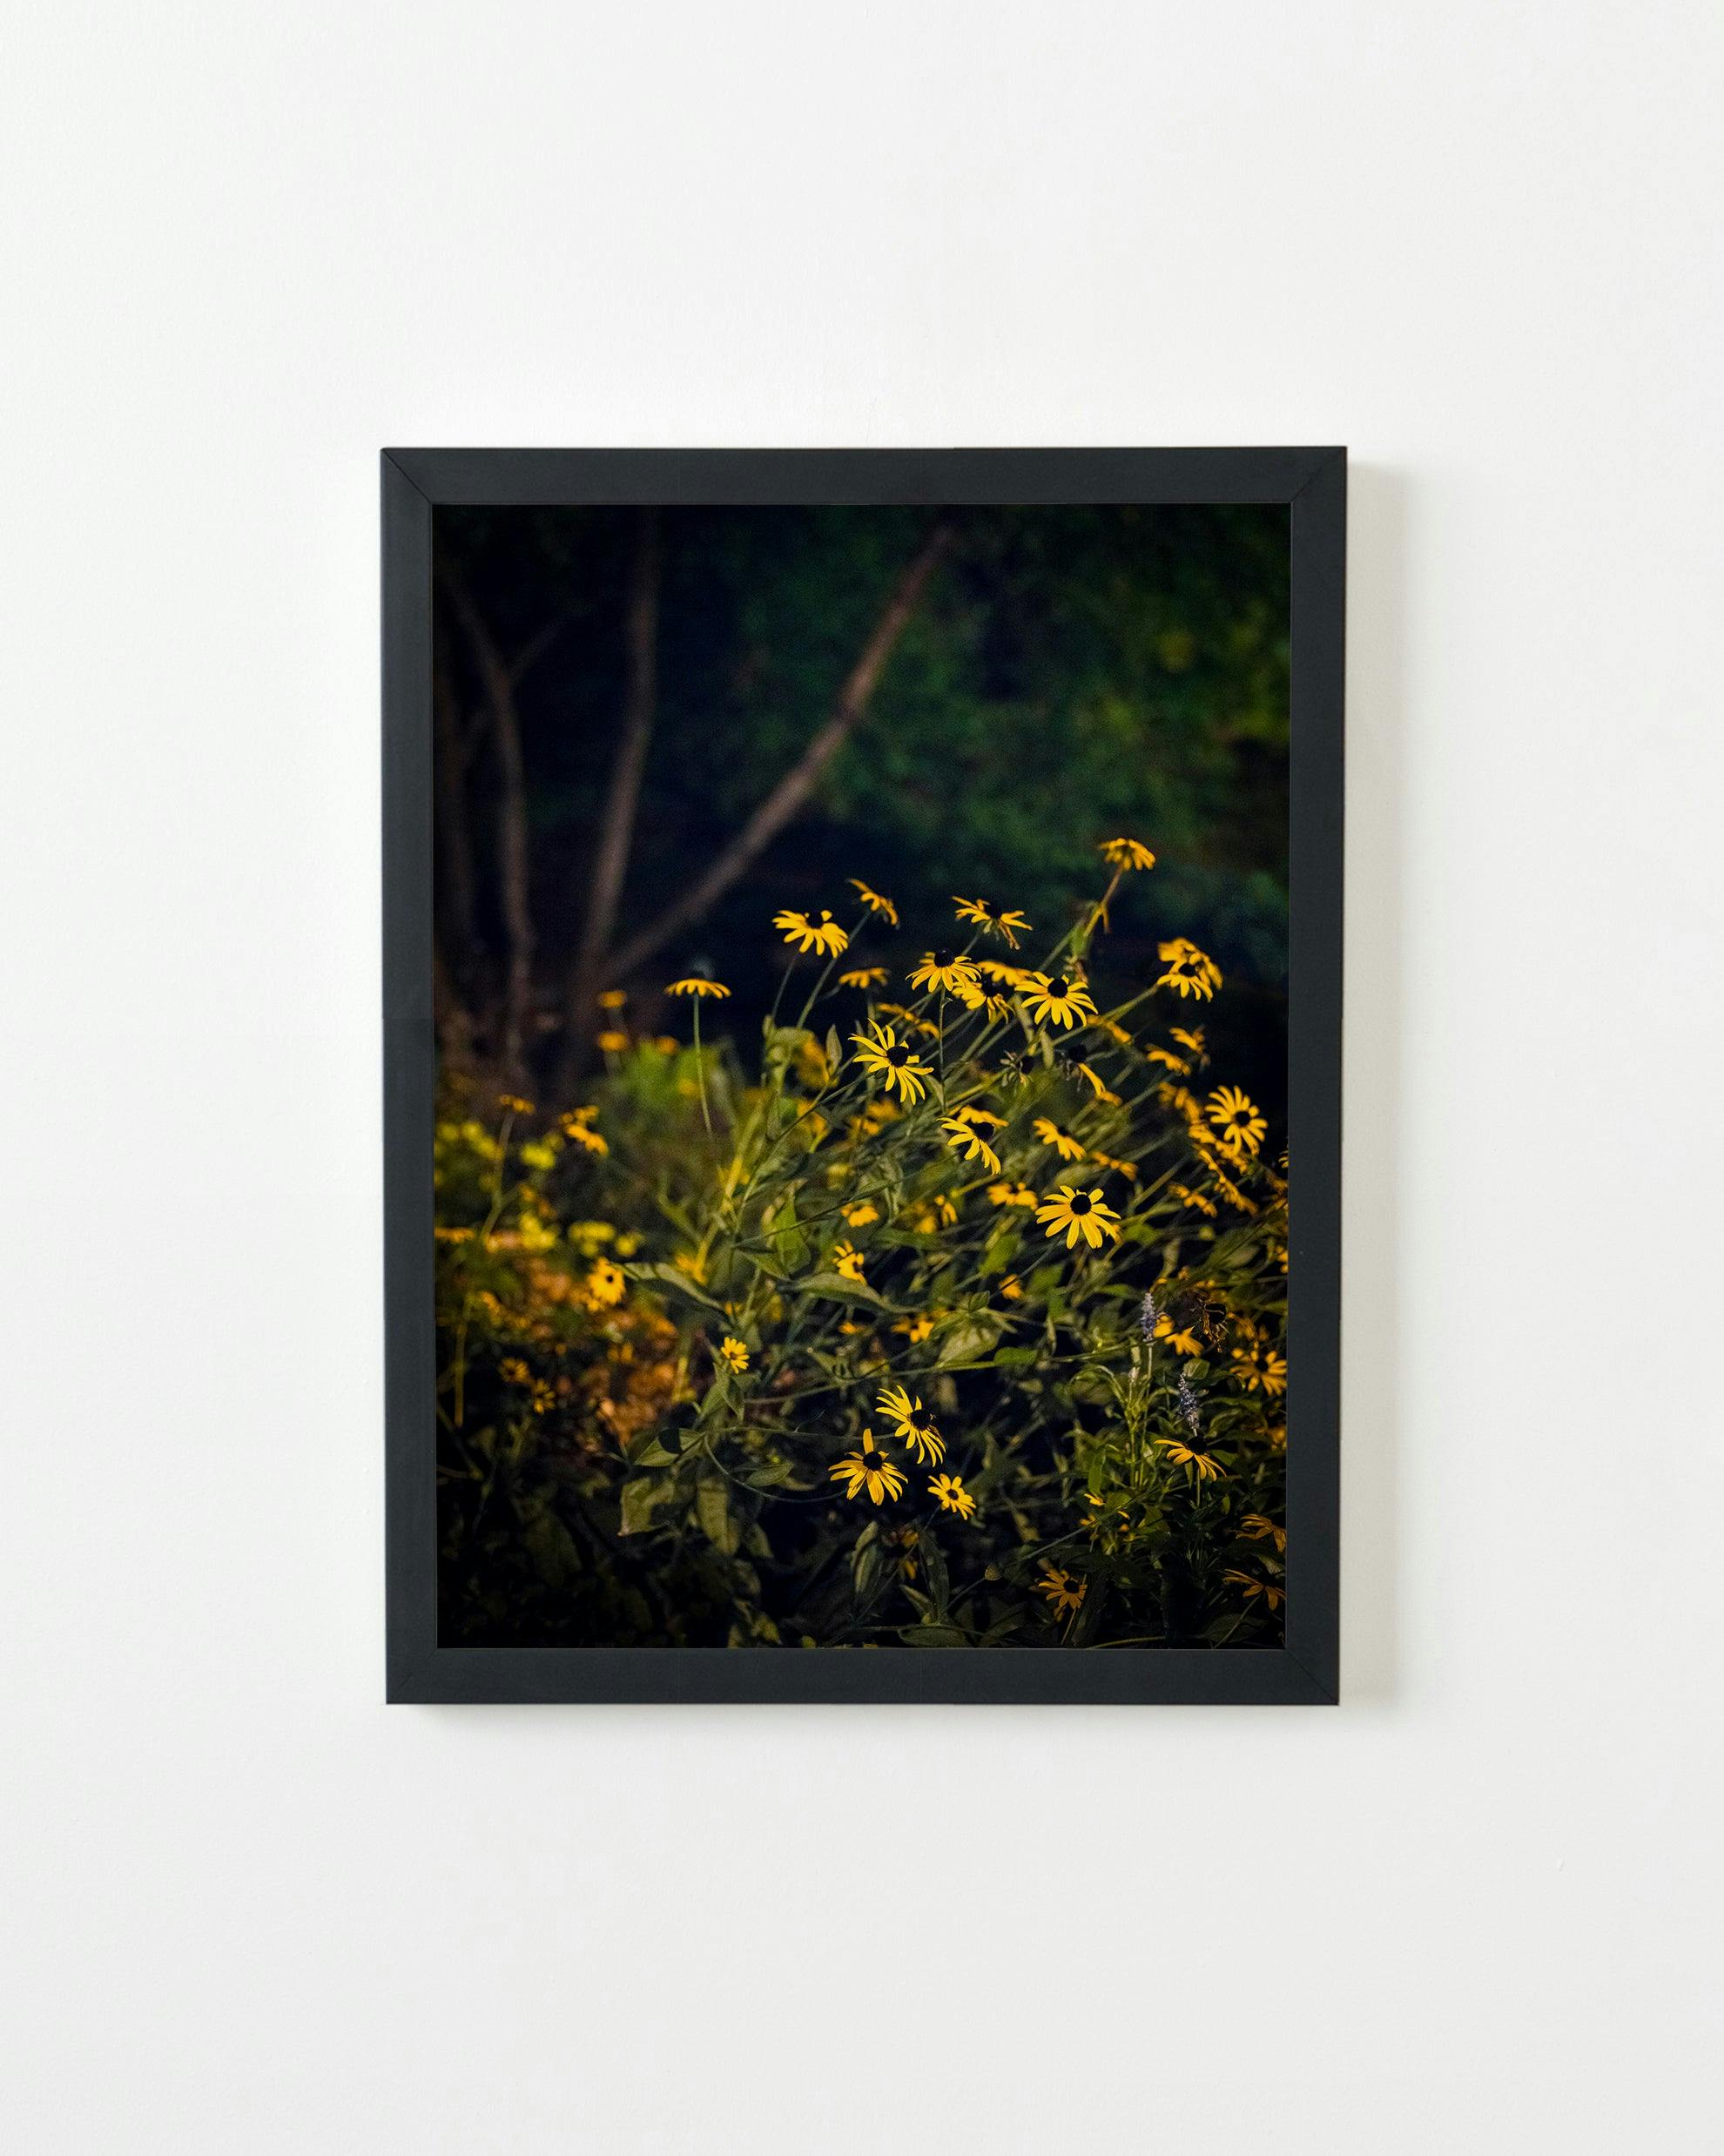 Photography by Anna Beeke titled "Midnight in the Garden #46".